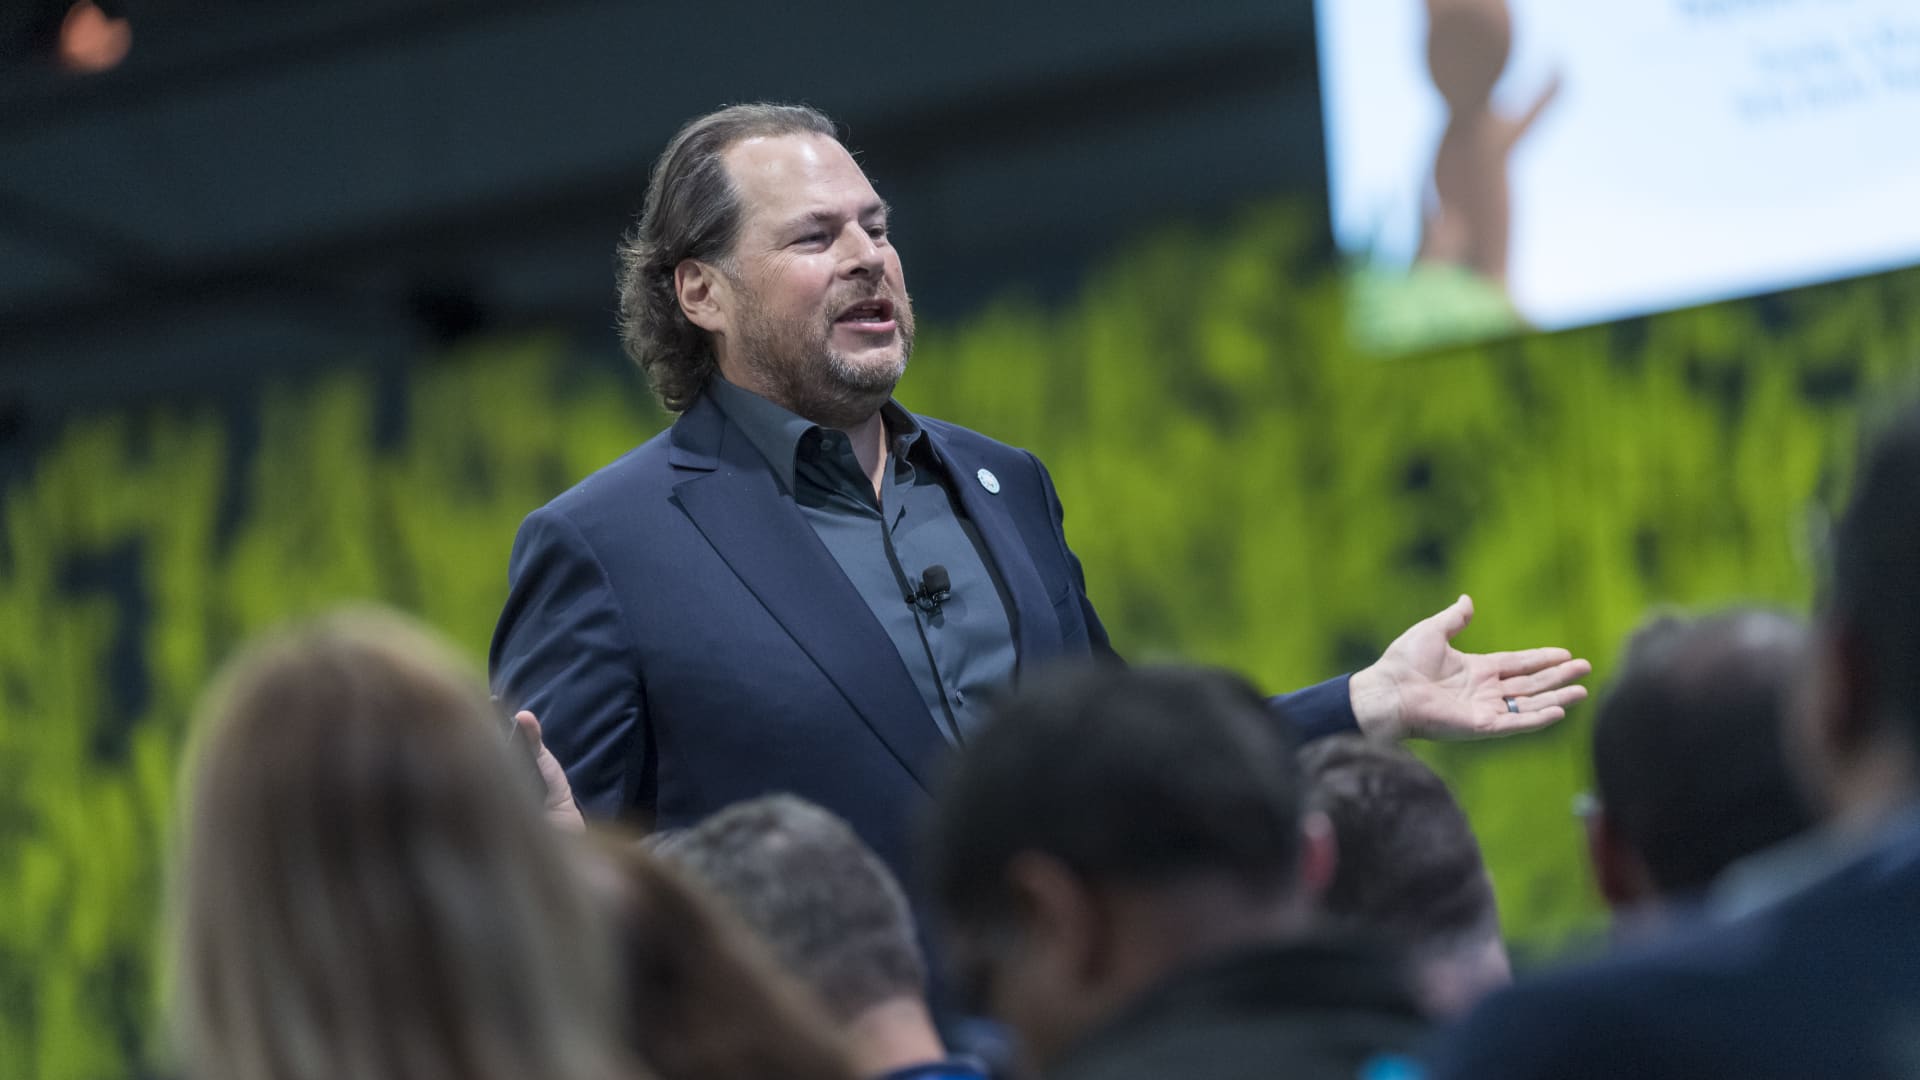 Filing: Salesforce sold all its remaining Snowflake shares in Q1 2022; Salesforce bought 2.1M shares for $250M in Snowflake's IPO in 2020, and sold ~95% in 2021 (Jordan Novet/CNBC)